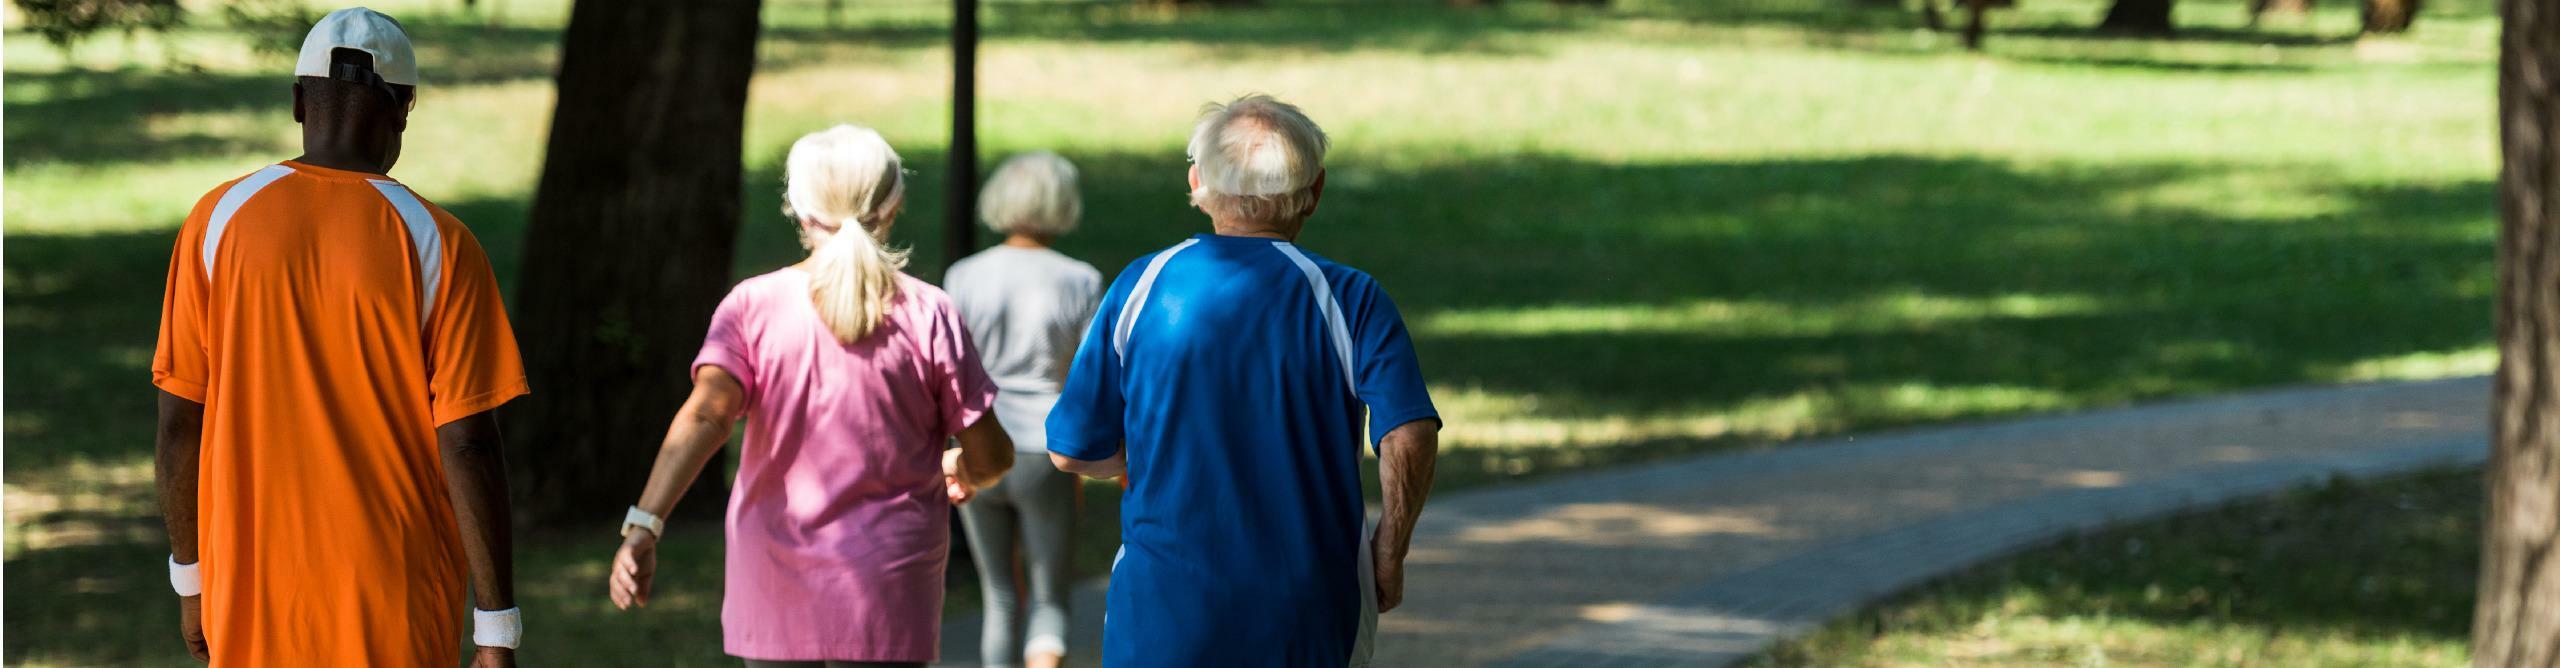 Seniors walking in park. Walk with Ease program reduces the pain of arthritis at the Regional YMCA of Western CT